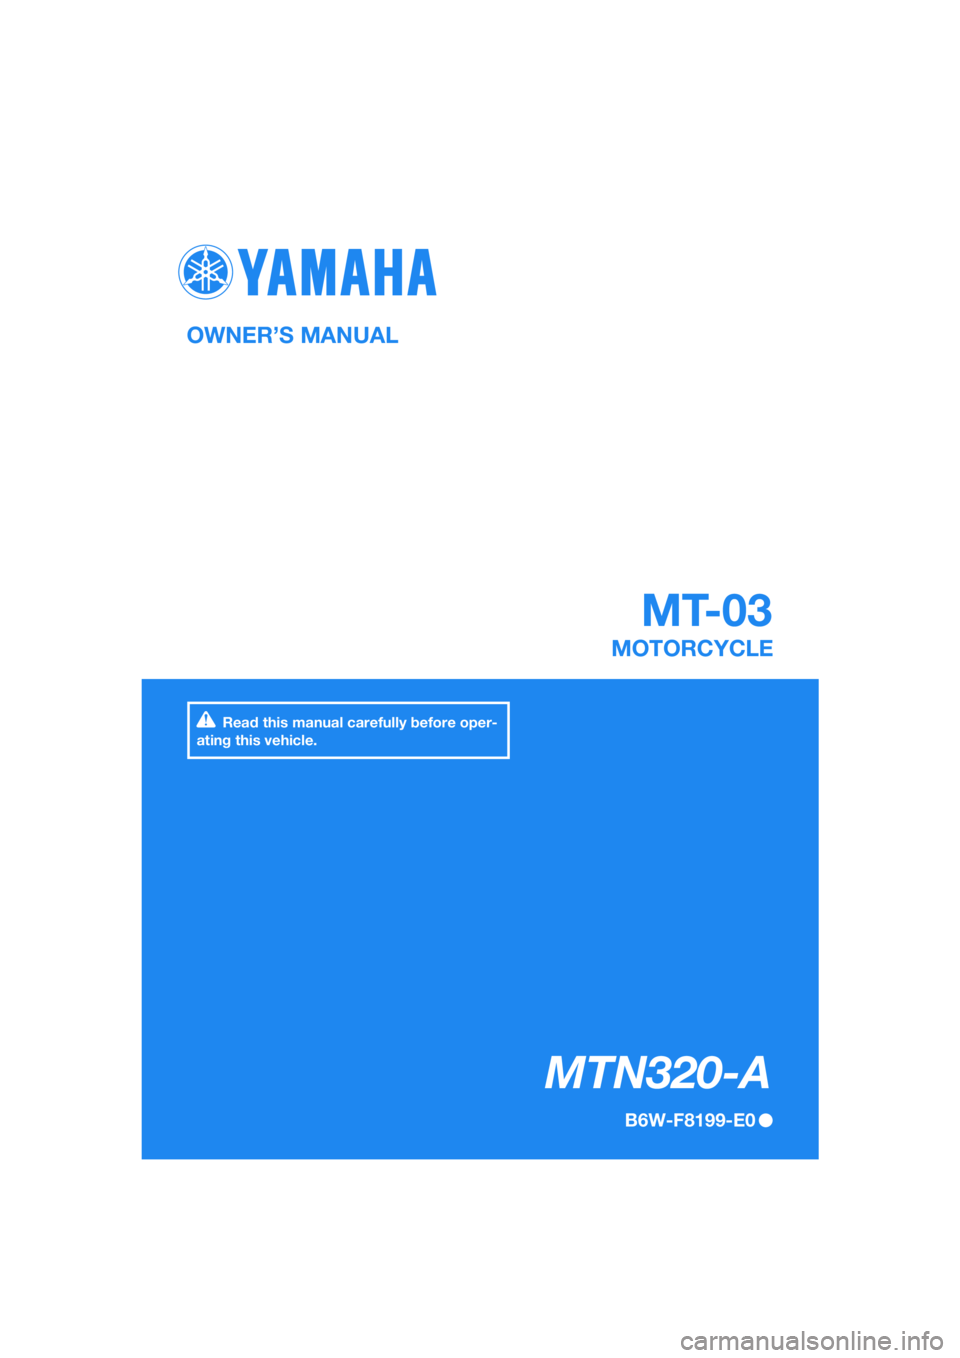 YAMAHA MT-03 2020  Owners Manual DIC183
MTN320-A
OWNER’S MANUAL
B6W-F8199-E0
MOTORCYCLE
[English  (E)]
Read this manual carefully before oper-
ating this vehicle.
 
MT-03 